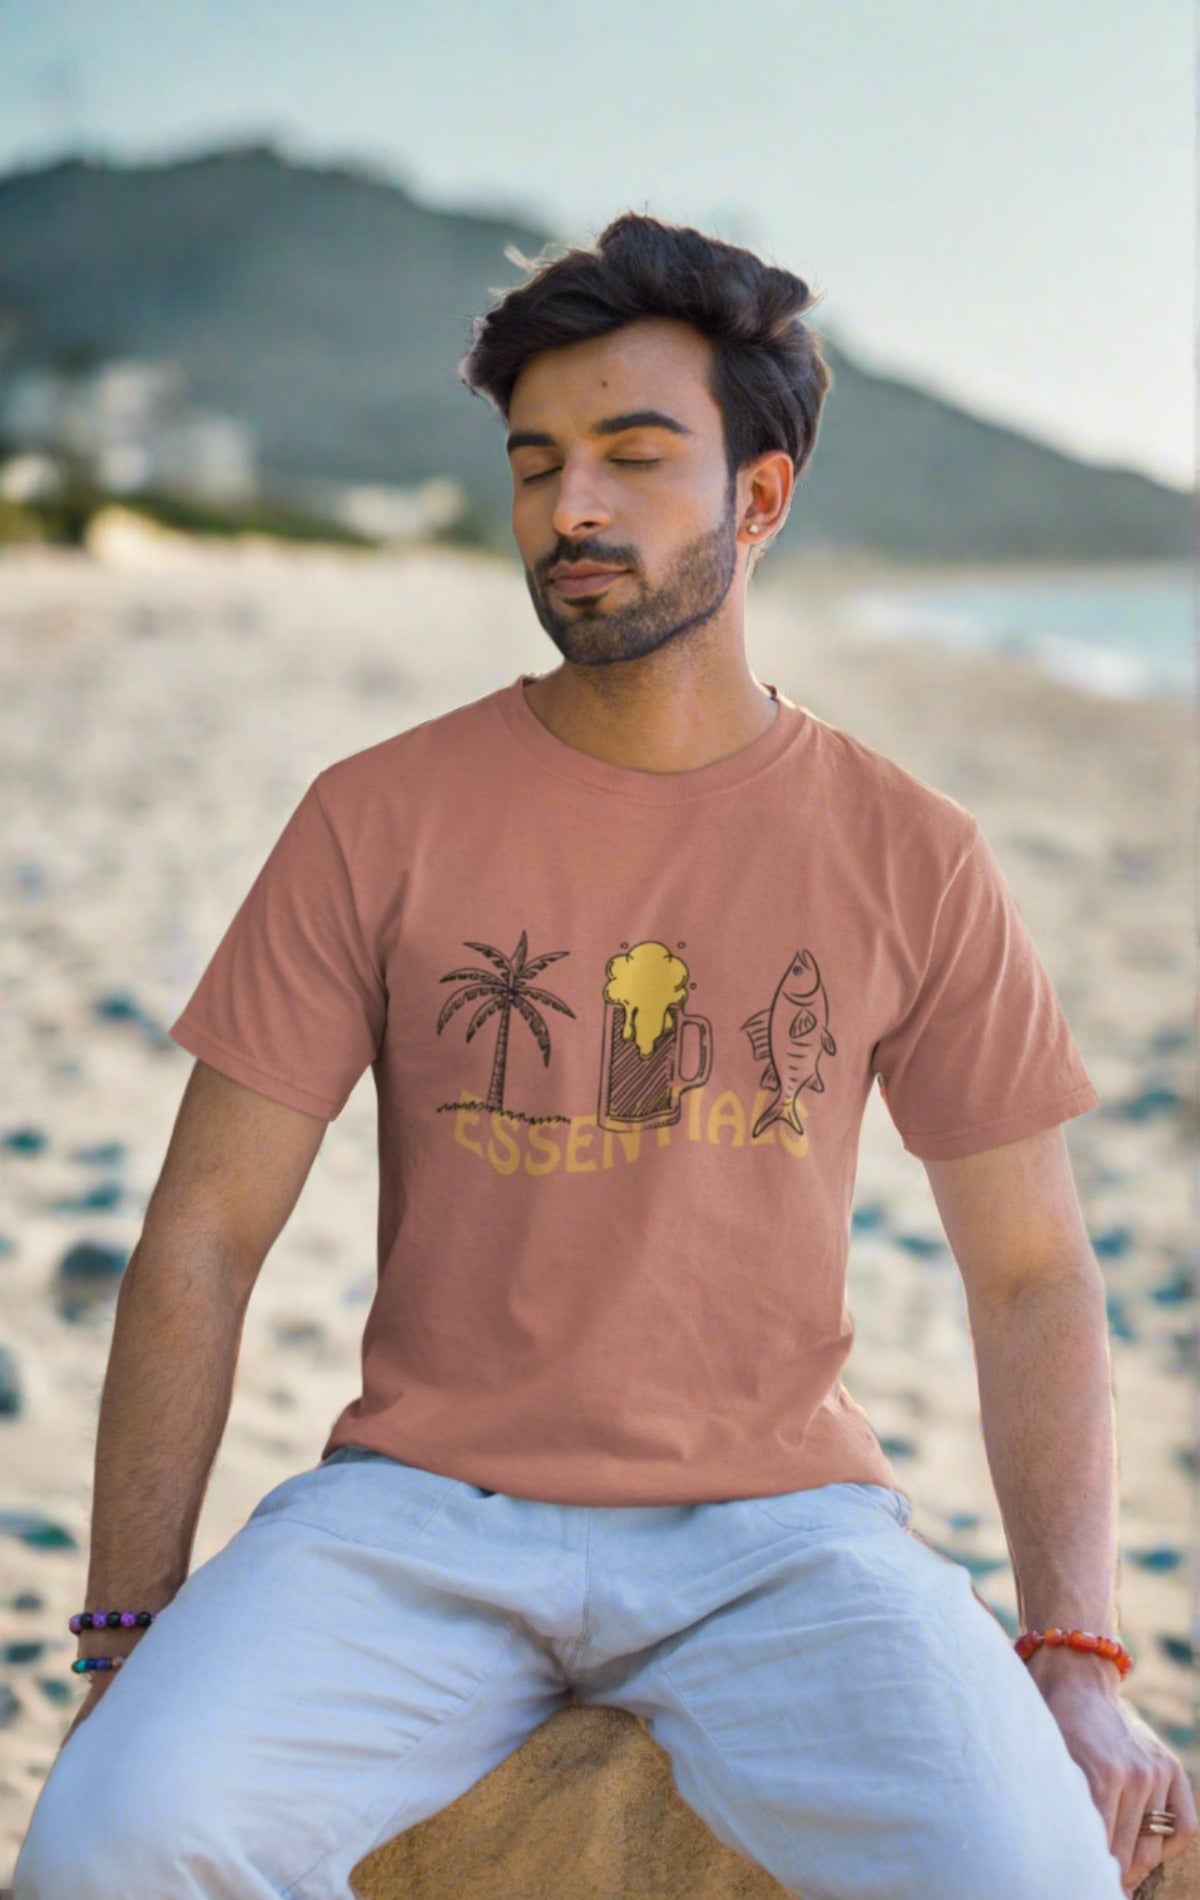 Essentials T-shirt inspired by Goa's beach culture, nightlife, and seafood cuisine